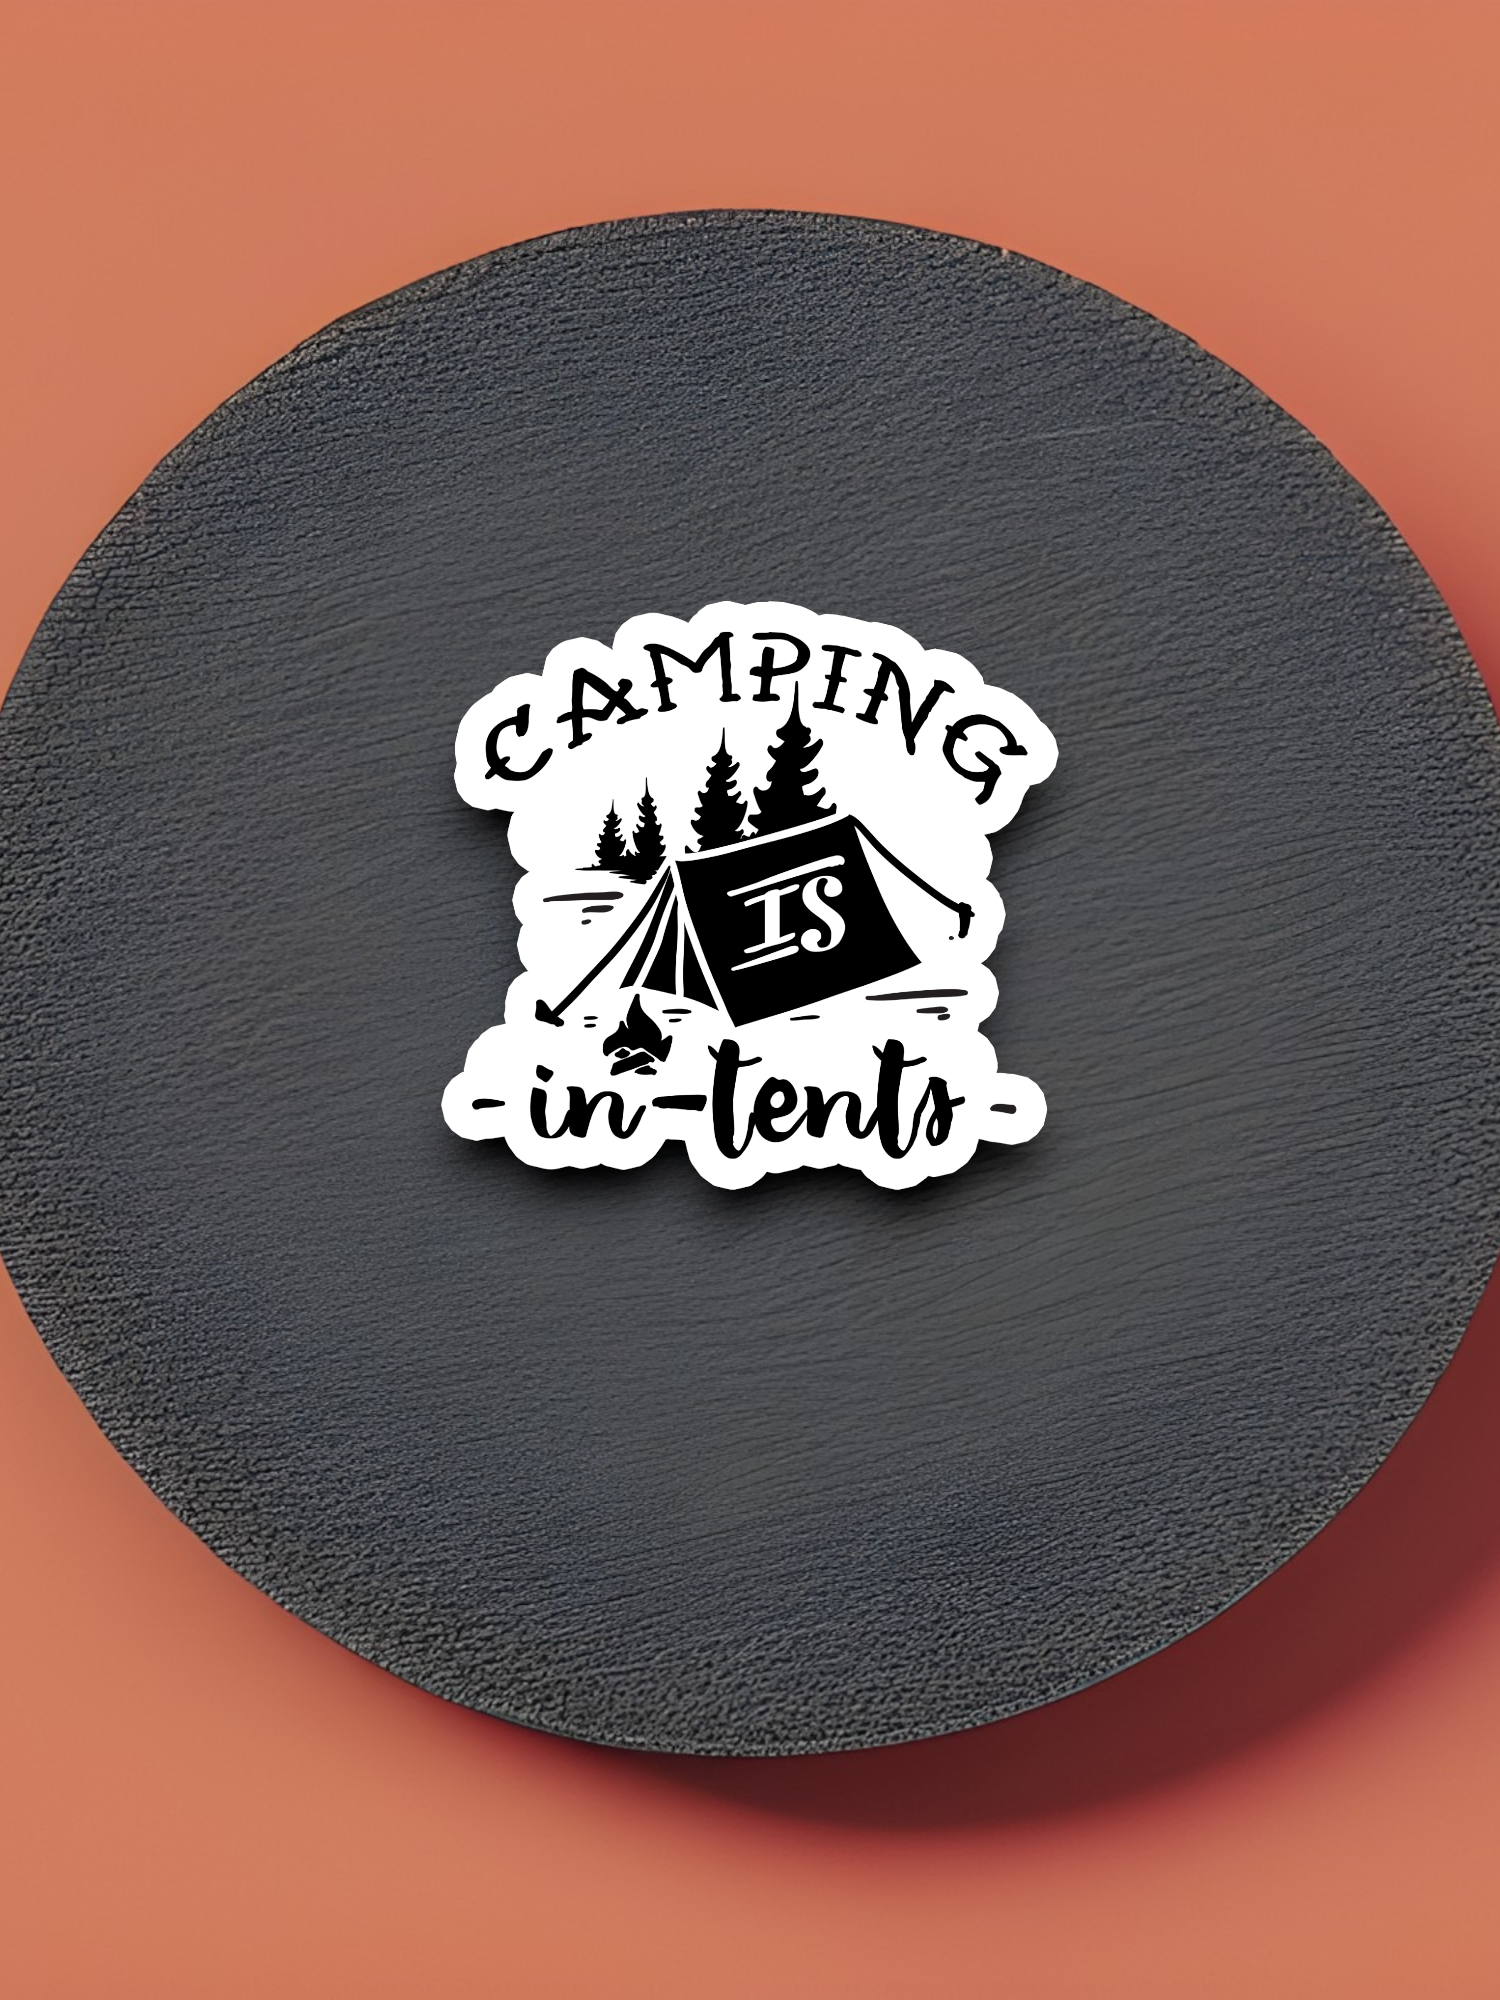 Camping is in-tents - Travel Sticker